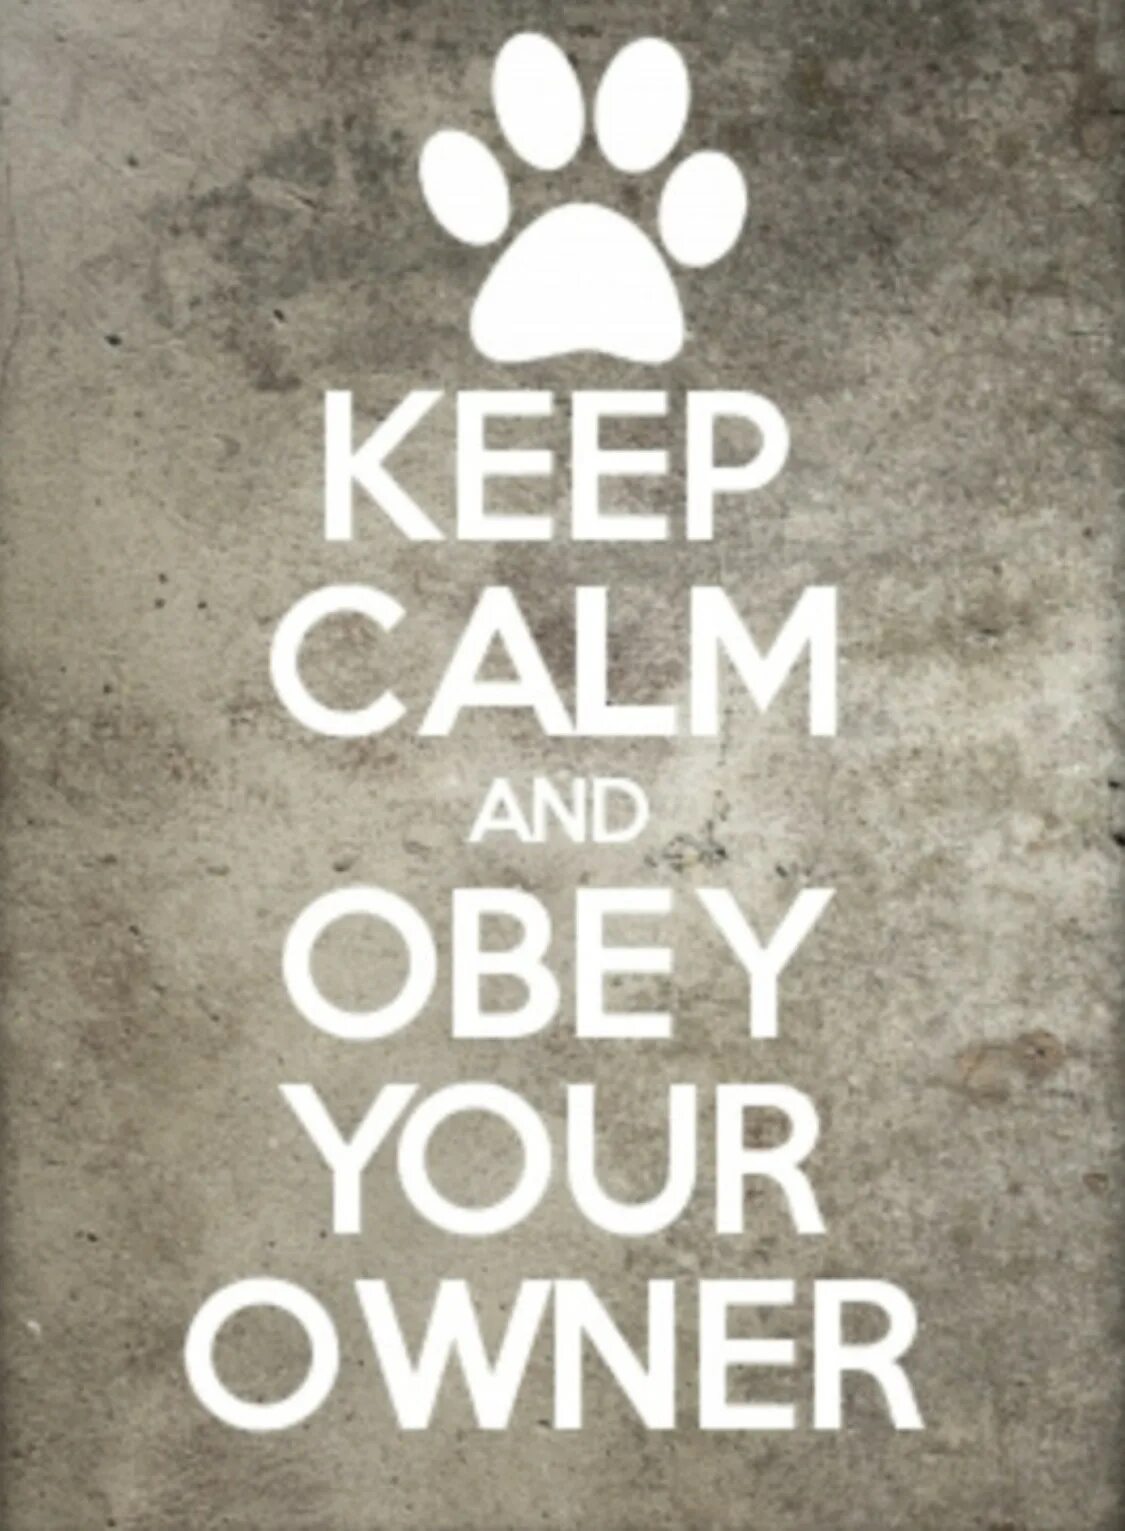 Keep Calm and Obey. Keep Calm and Obey your wife. Keep Sweet: Pray and Obey. Calm down and Breath. Making him stay